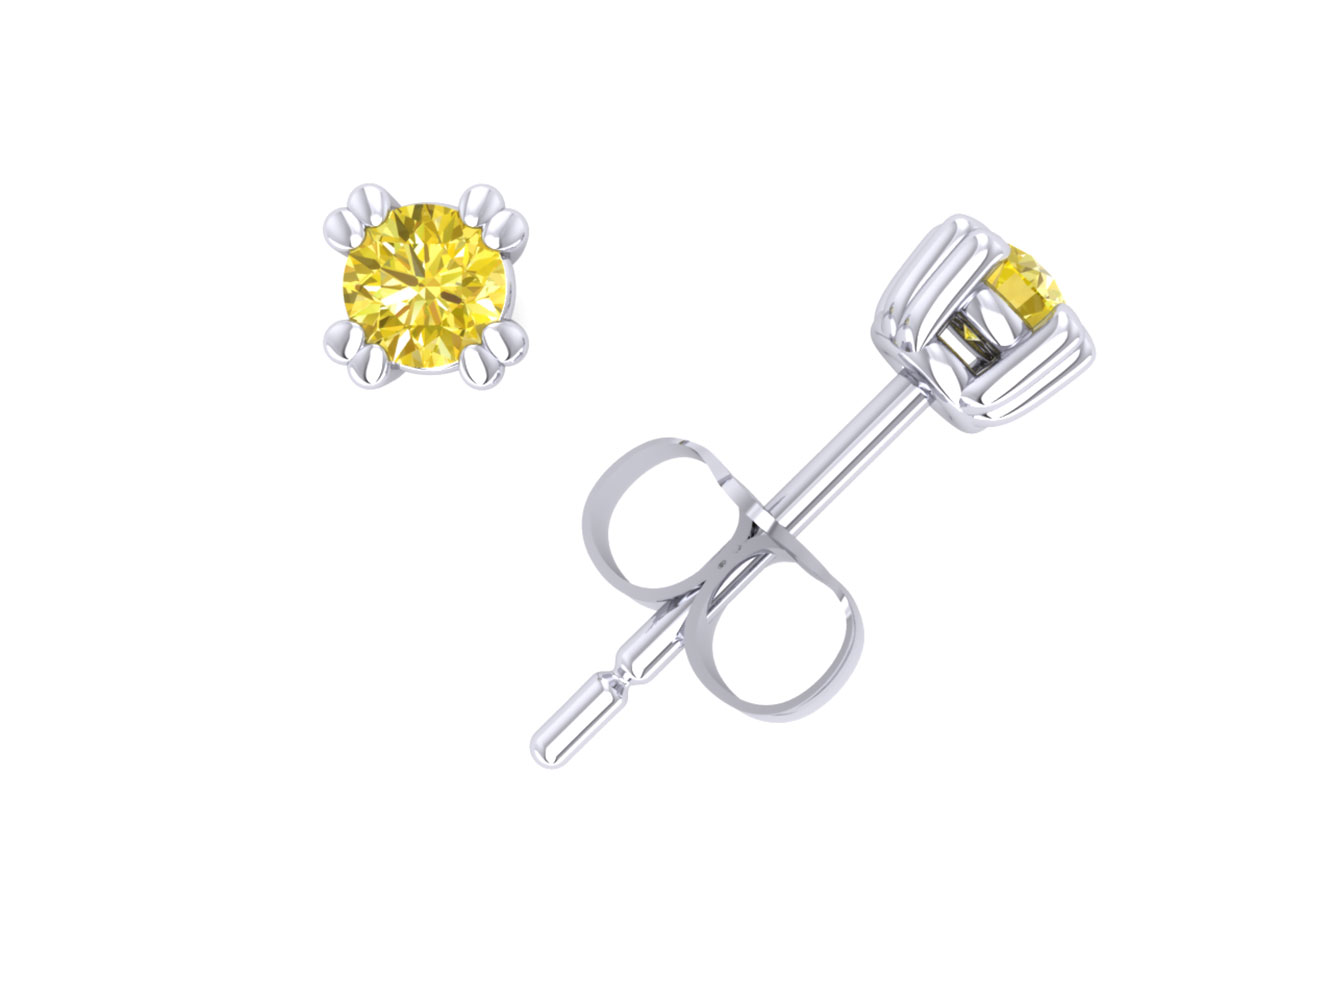 Jewel We Sell 1/4Ct Round Cut Yellow Diamond Basket Stud Earrings 14k White or Yellow Gold Double Prong I2